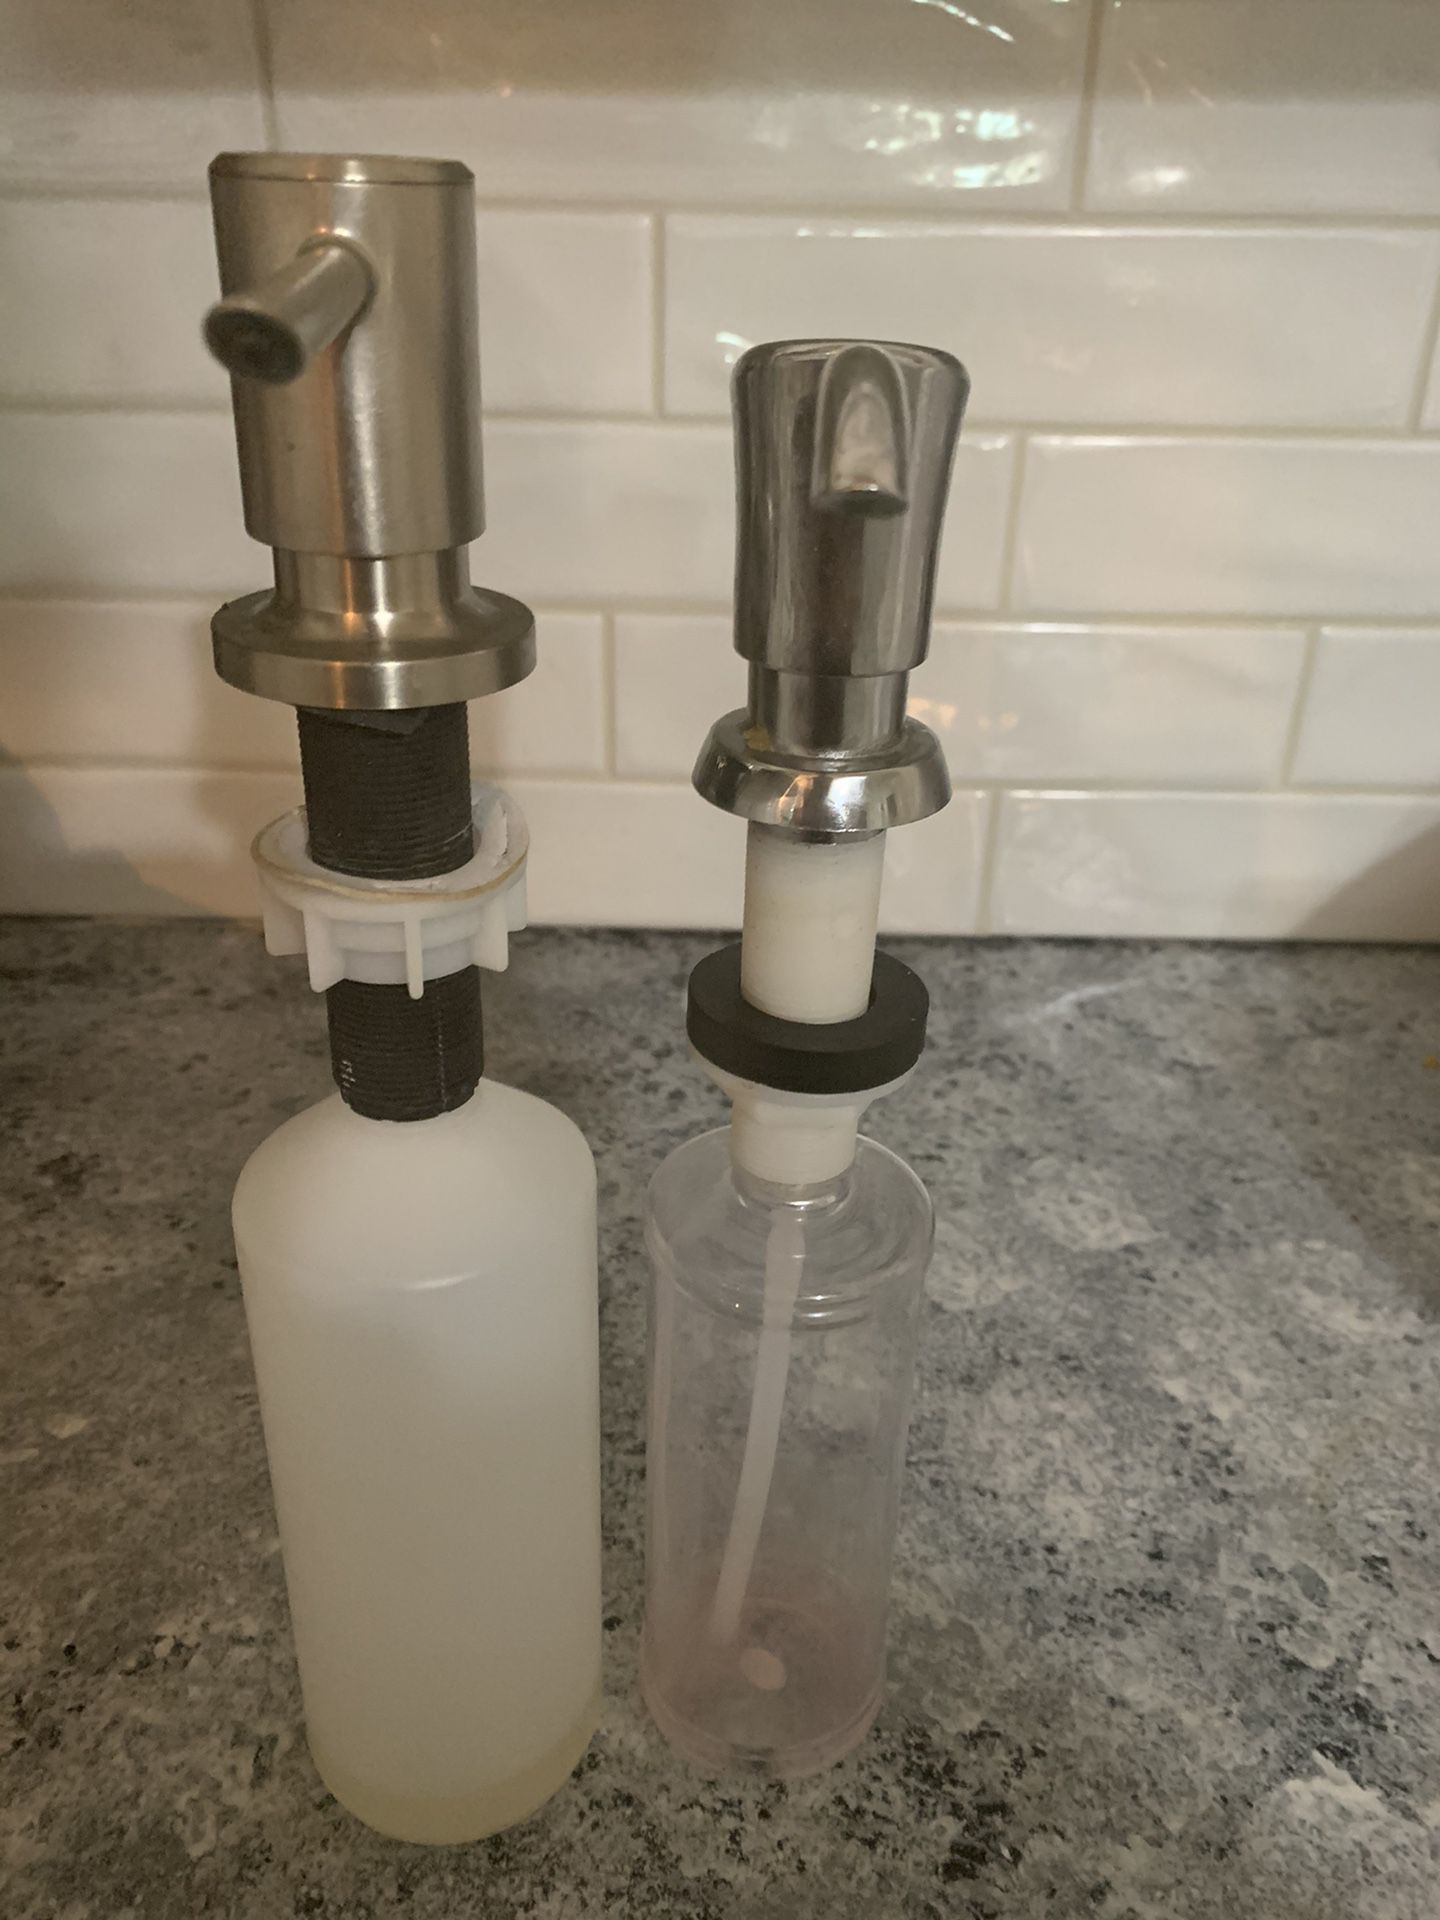 Two kitchen sink soap dispensers